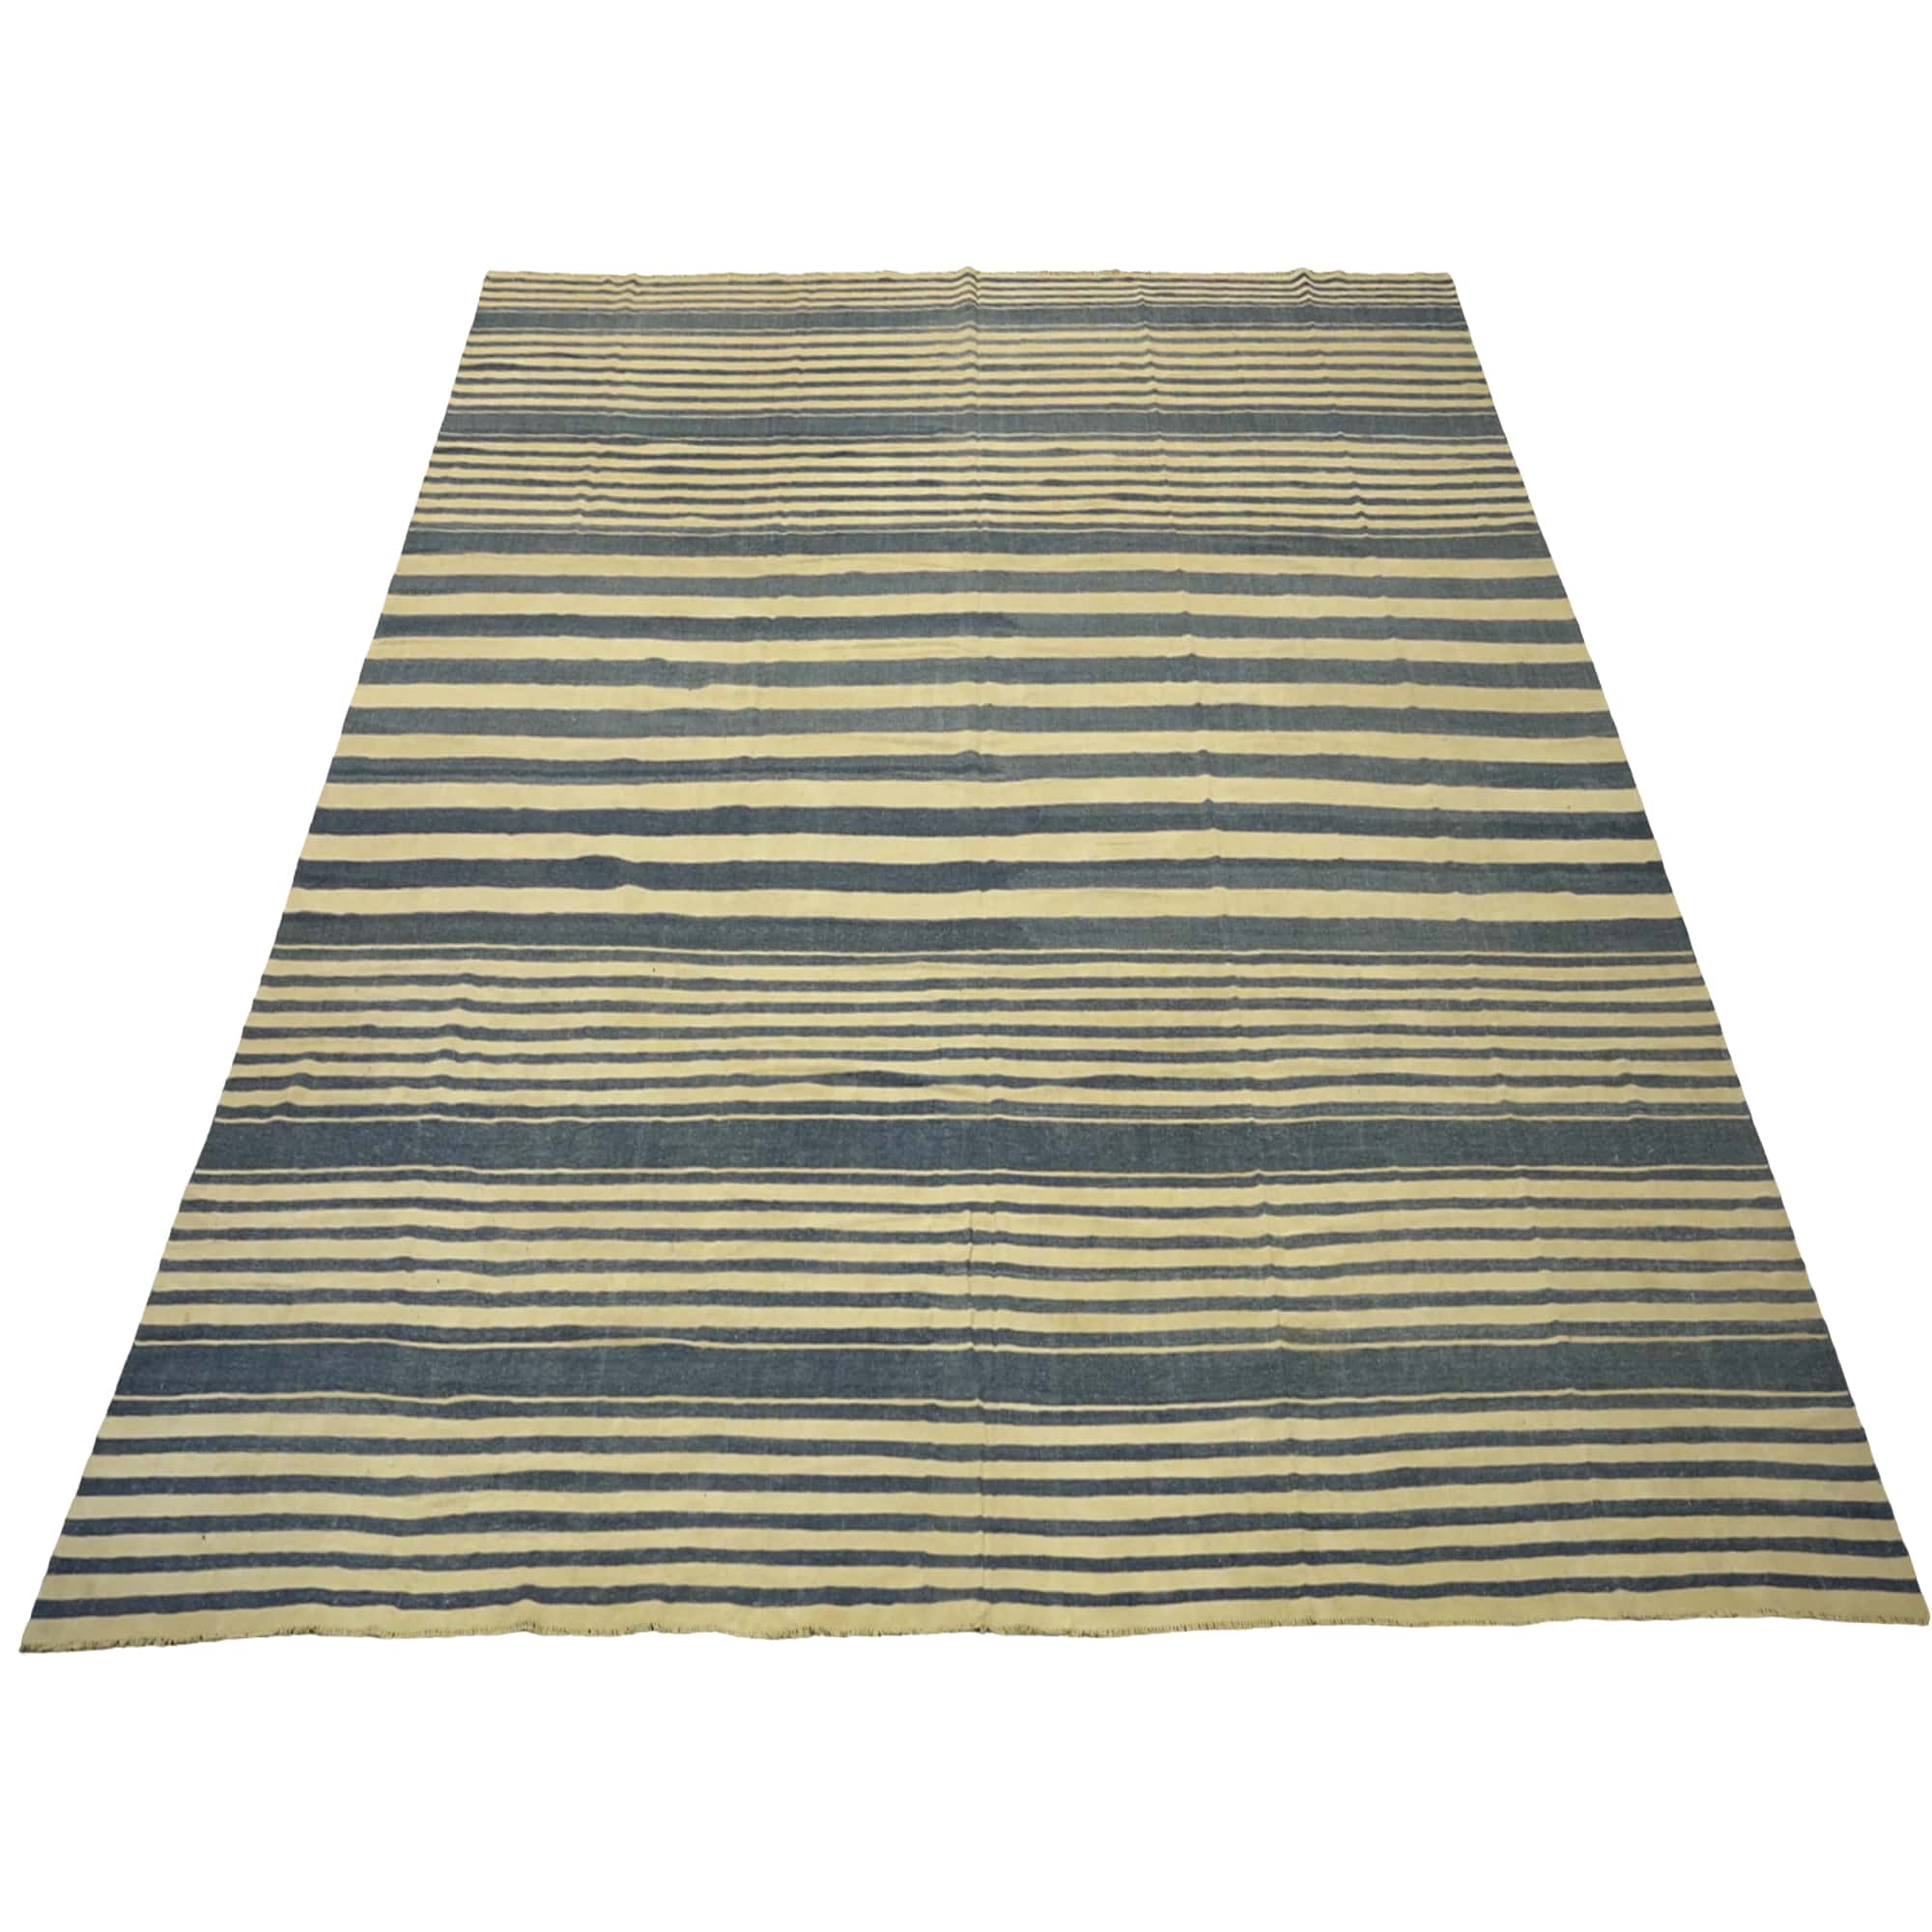 Vintage Dhurrie Rug with Stripes, from Rug & Kilim For Sale